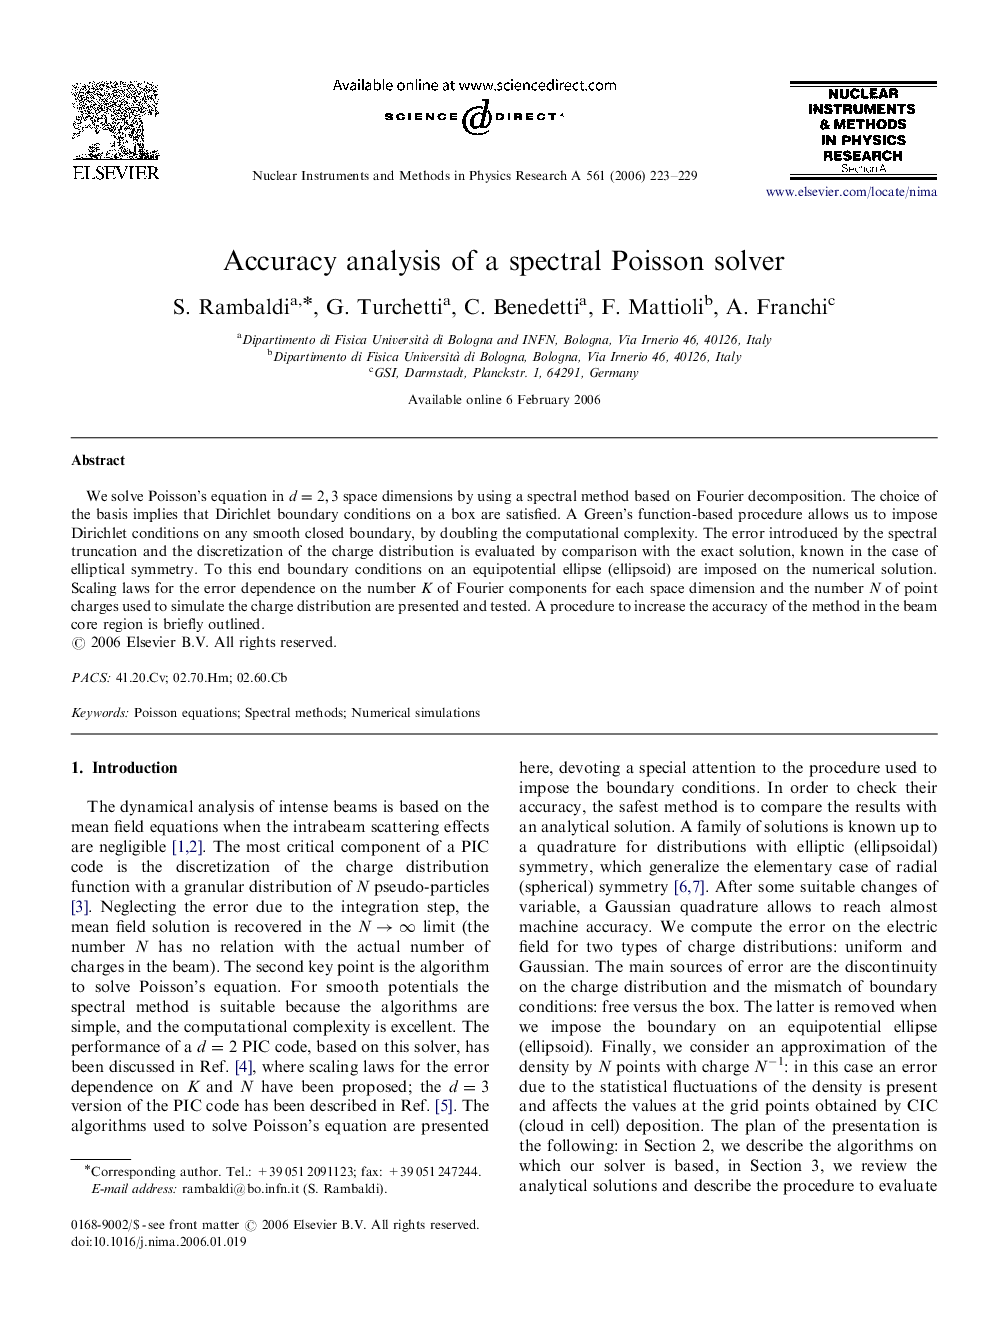 Accuracy analysis of a spectral Poisson solver